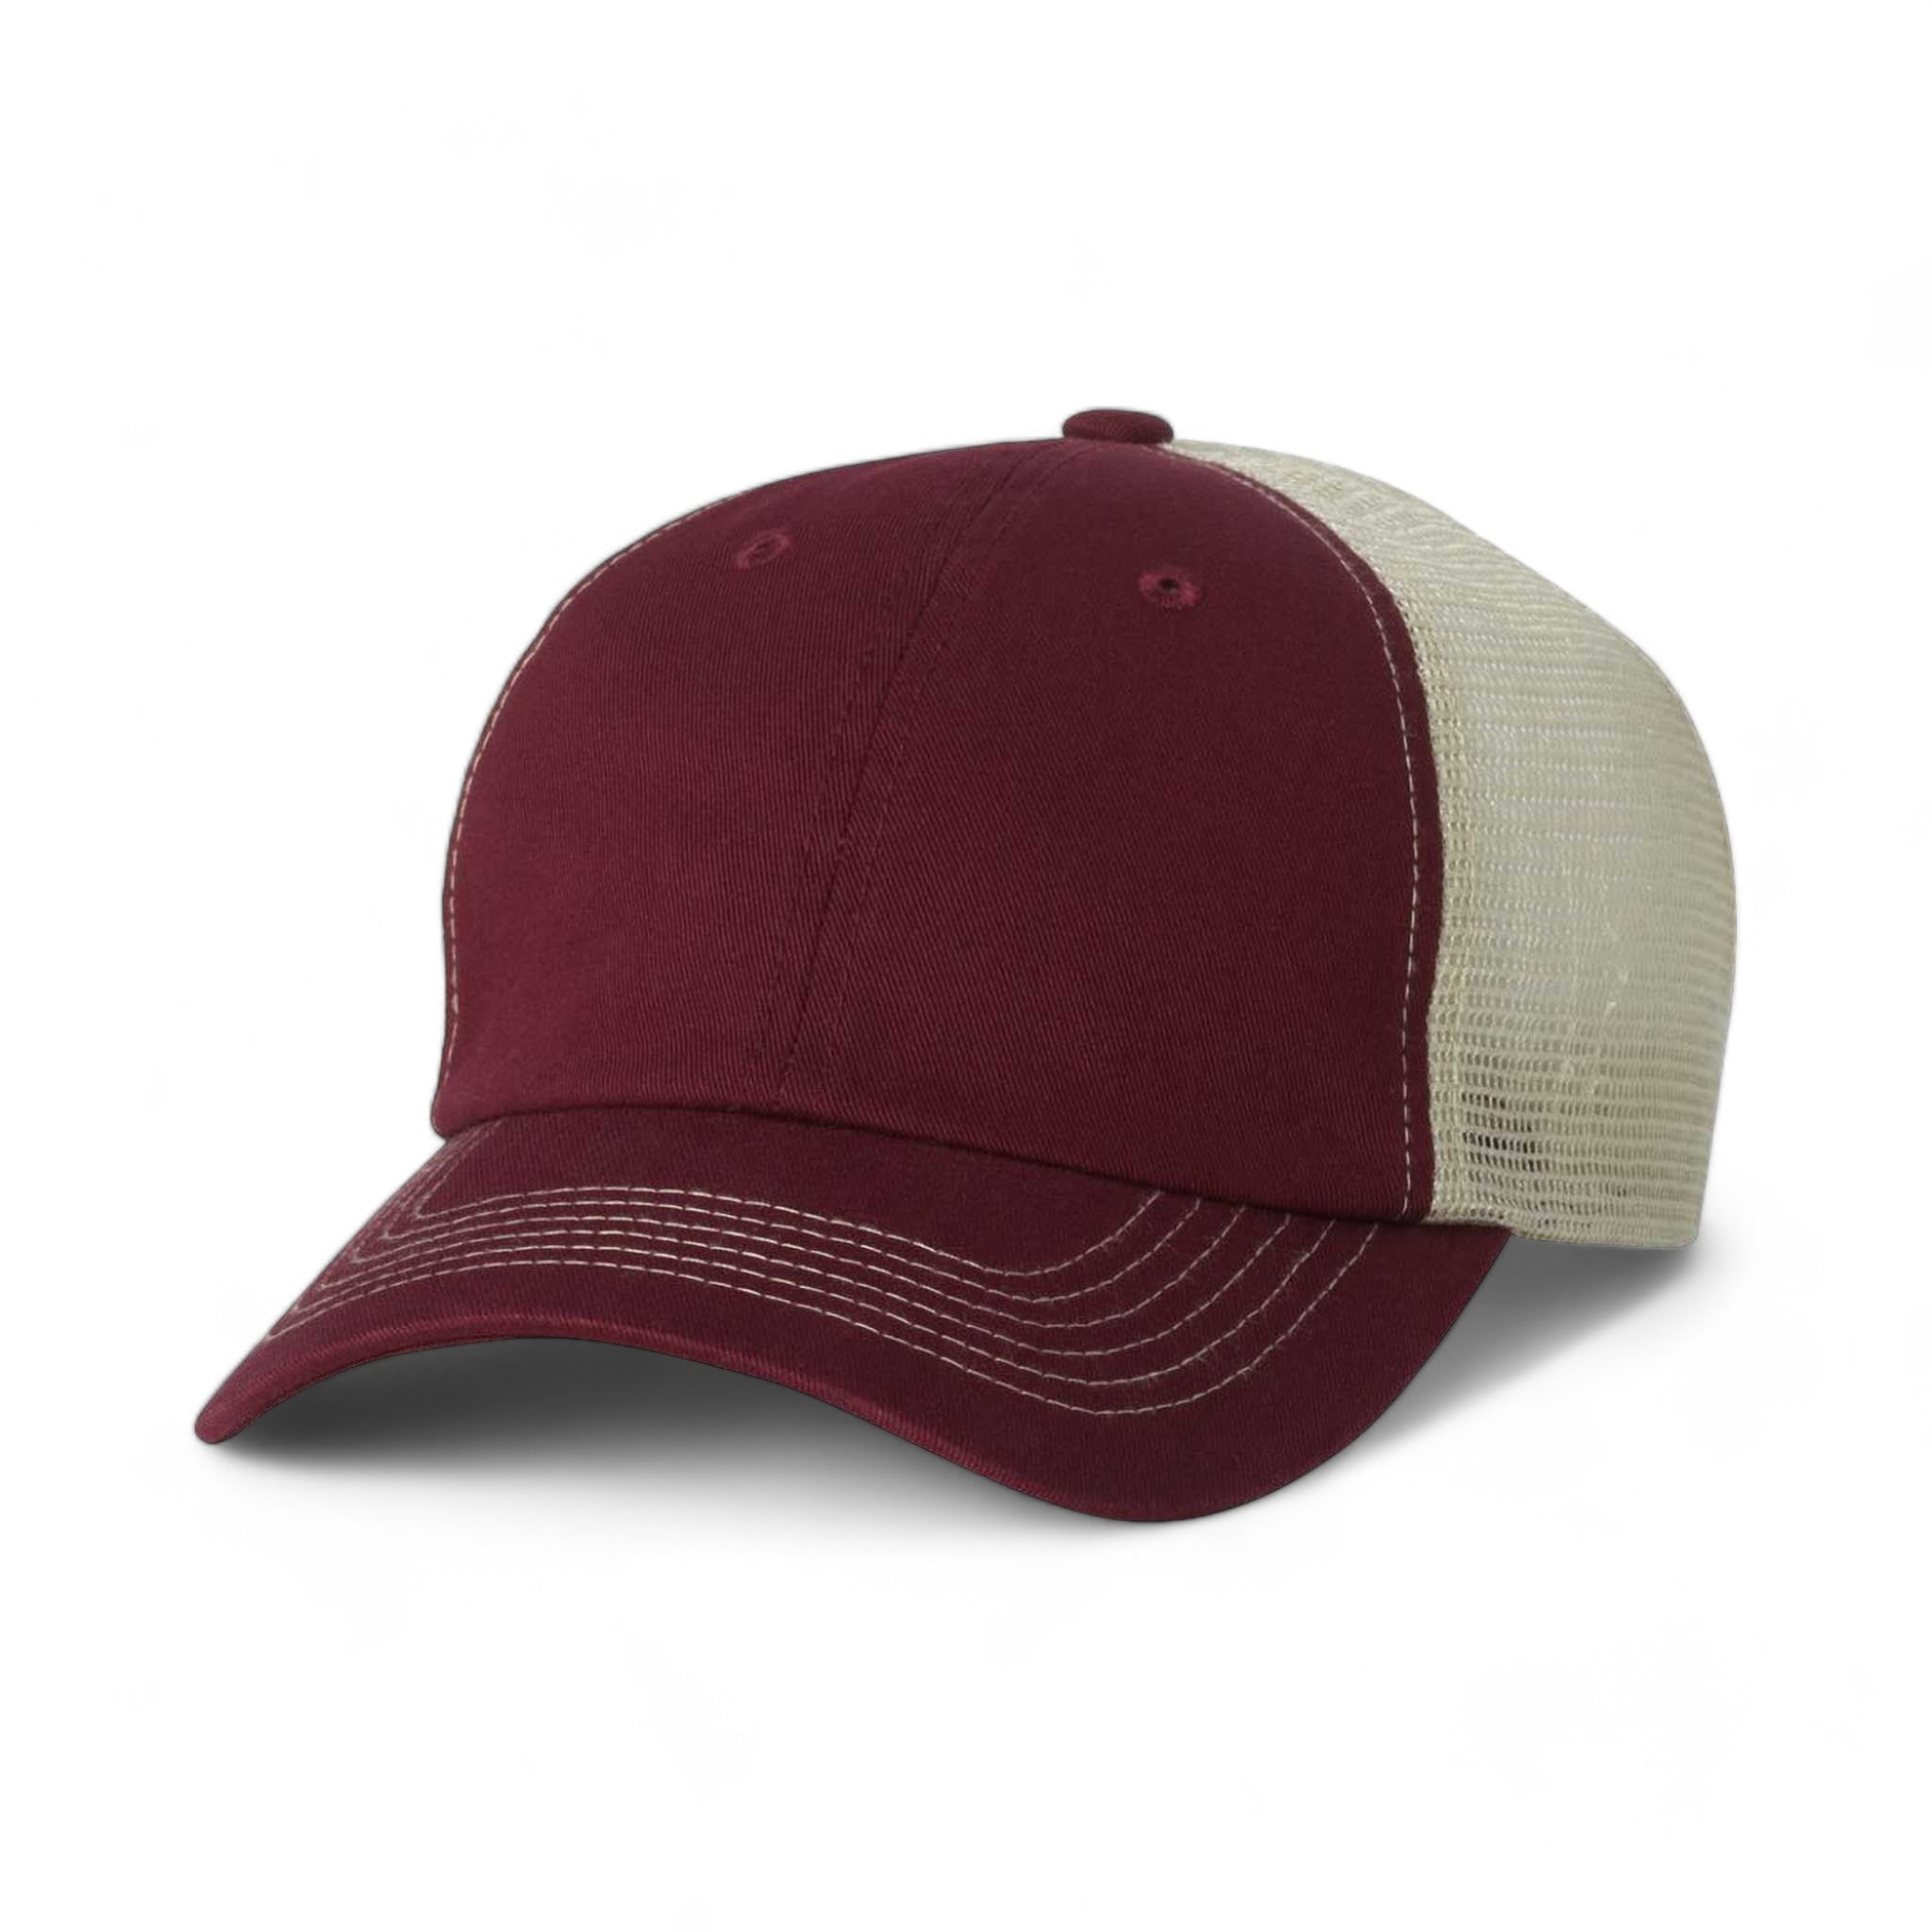 Front view of Sportsman 3100 custom hat in maroon and stone